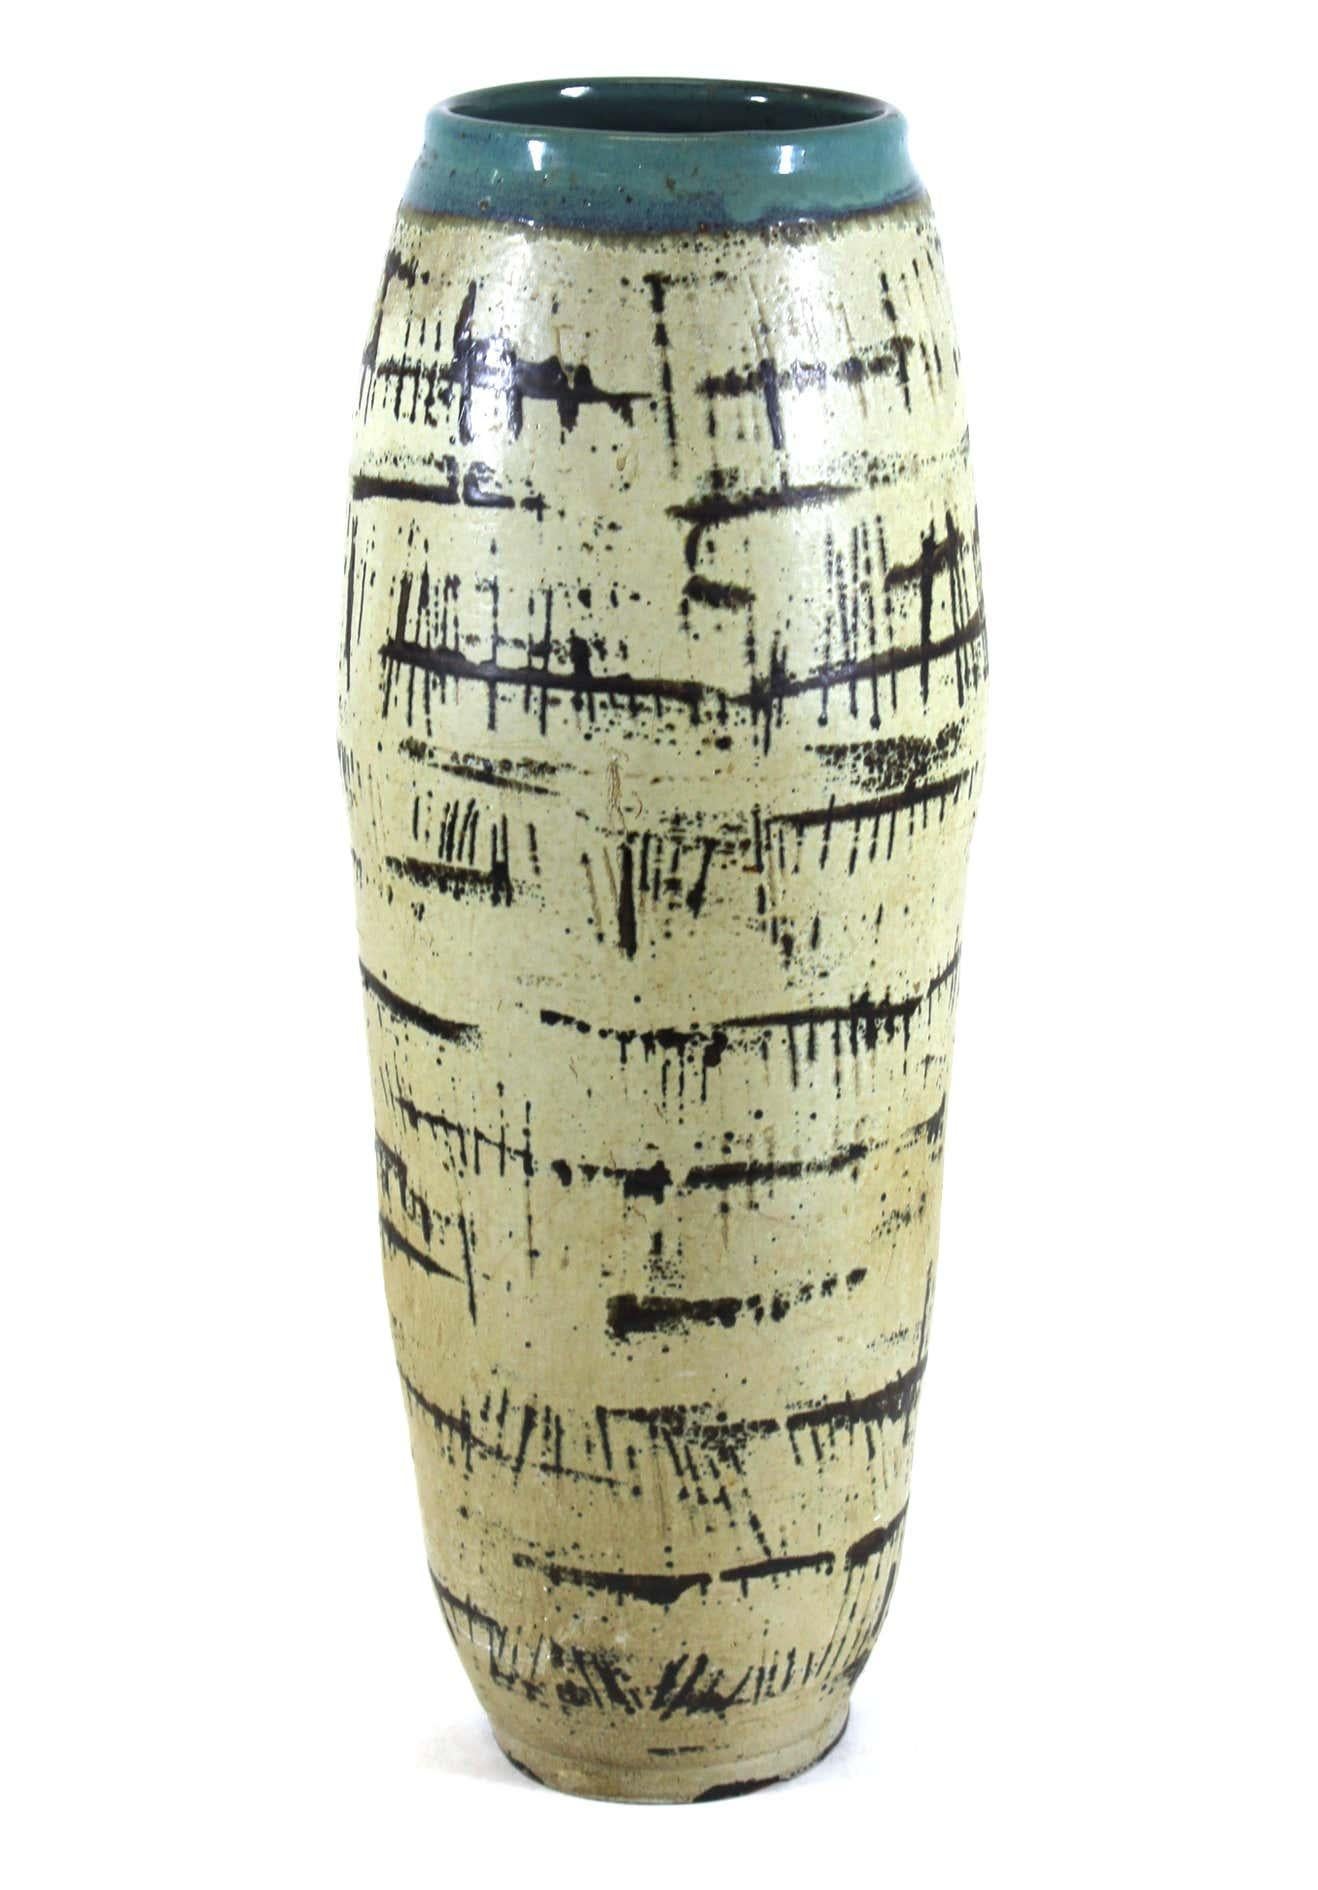 American Mid-Century Modern Ceramic Vase Attributed to Claire Tong